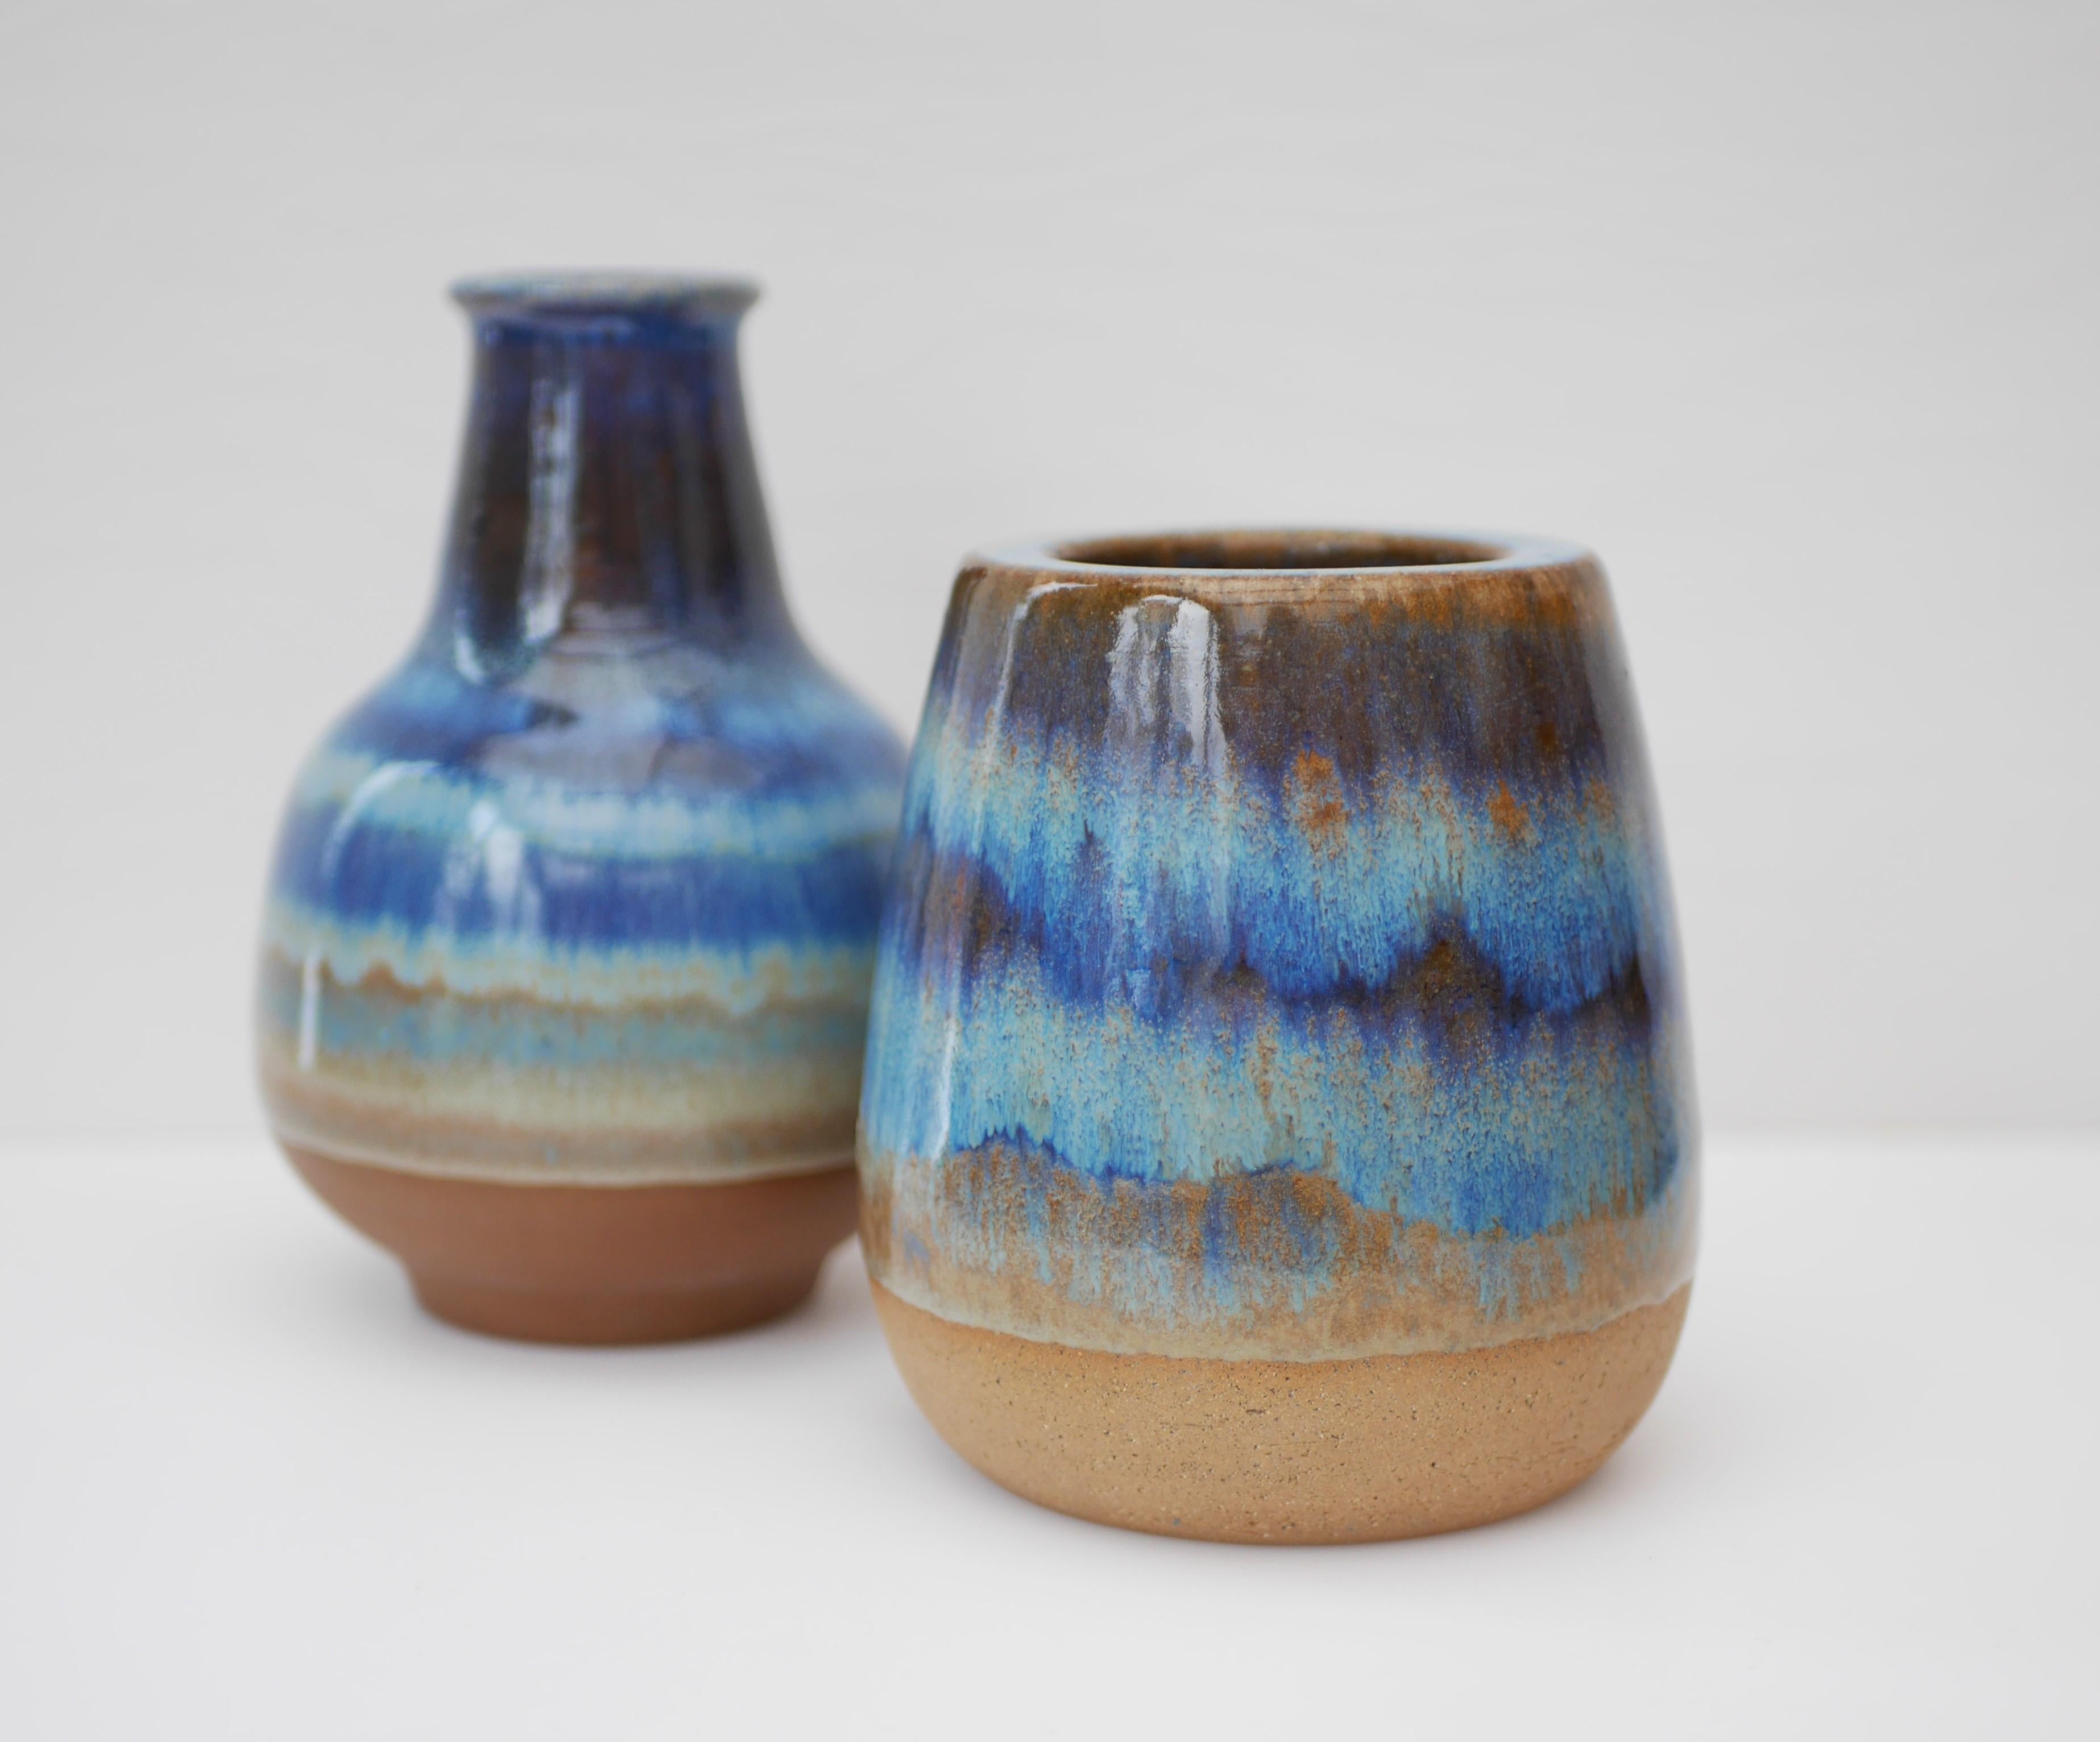 Two stunning vases by Micheal Andersen, Bornholm ceramics in Denmark. Heavy clay with a blue glaze that varies in color and intensity around the main body, on the rim and inside both pieces. The smaller one is 12.5cm (4.92